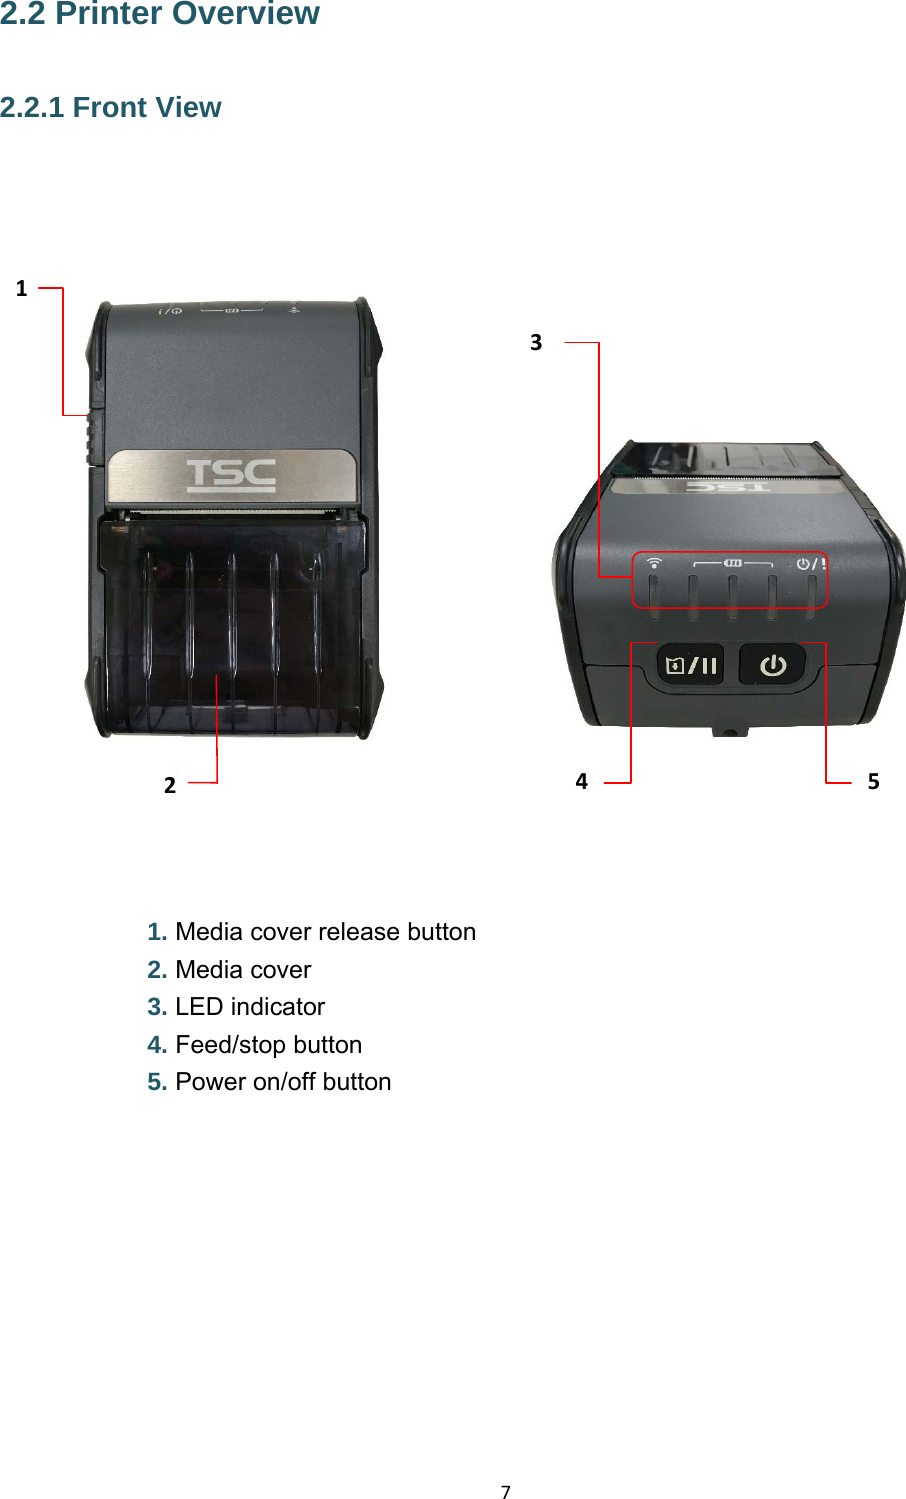 72.2 Printer Overview 2.2.1 Front View                    1. Media cover release button 2. Media cover   3. LED indicator 4. Feed/stop button 5. Power on/off button  34512